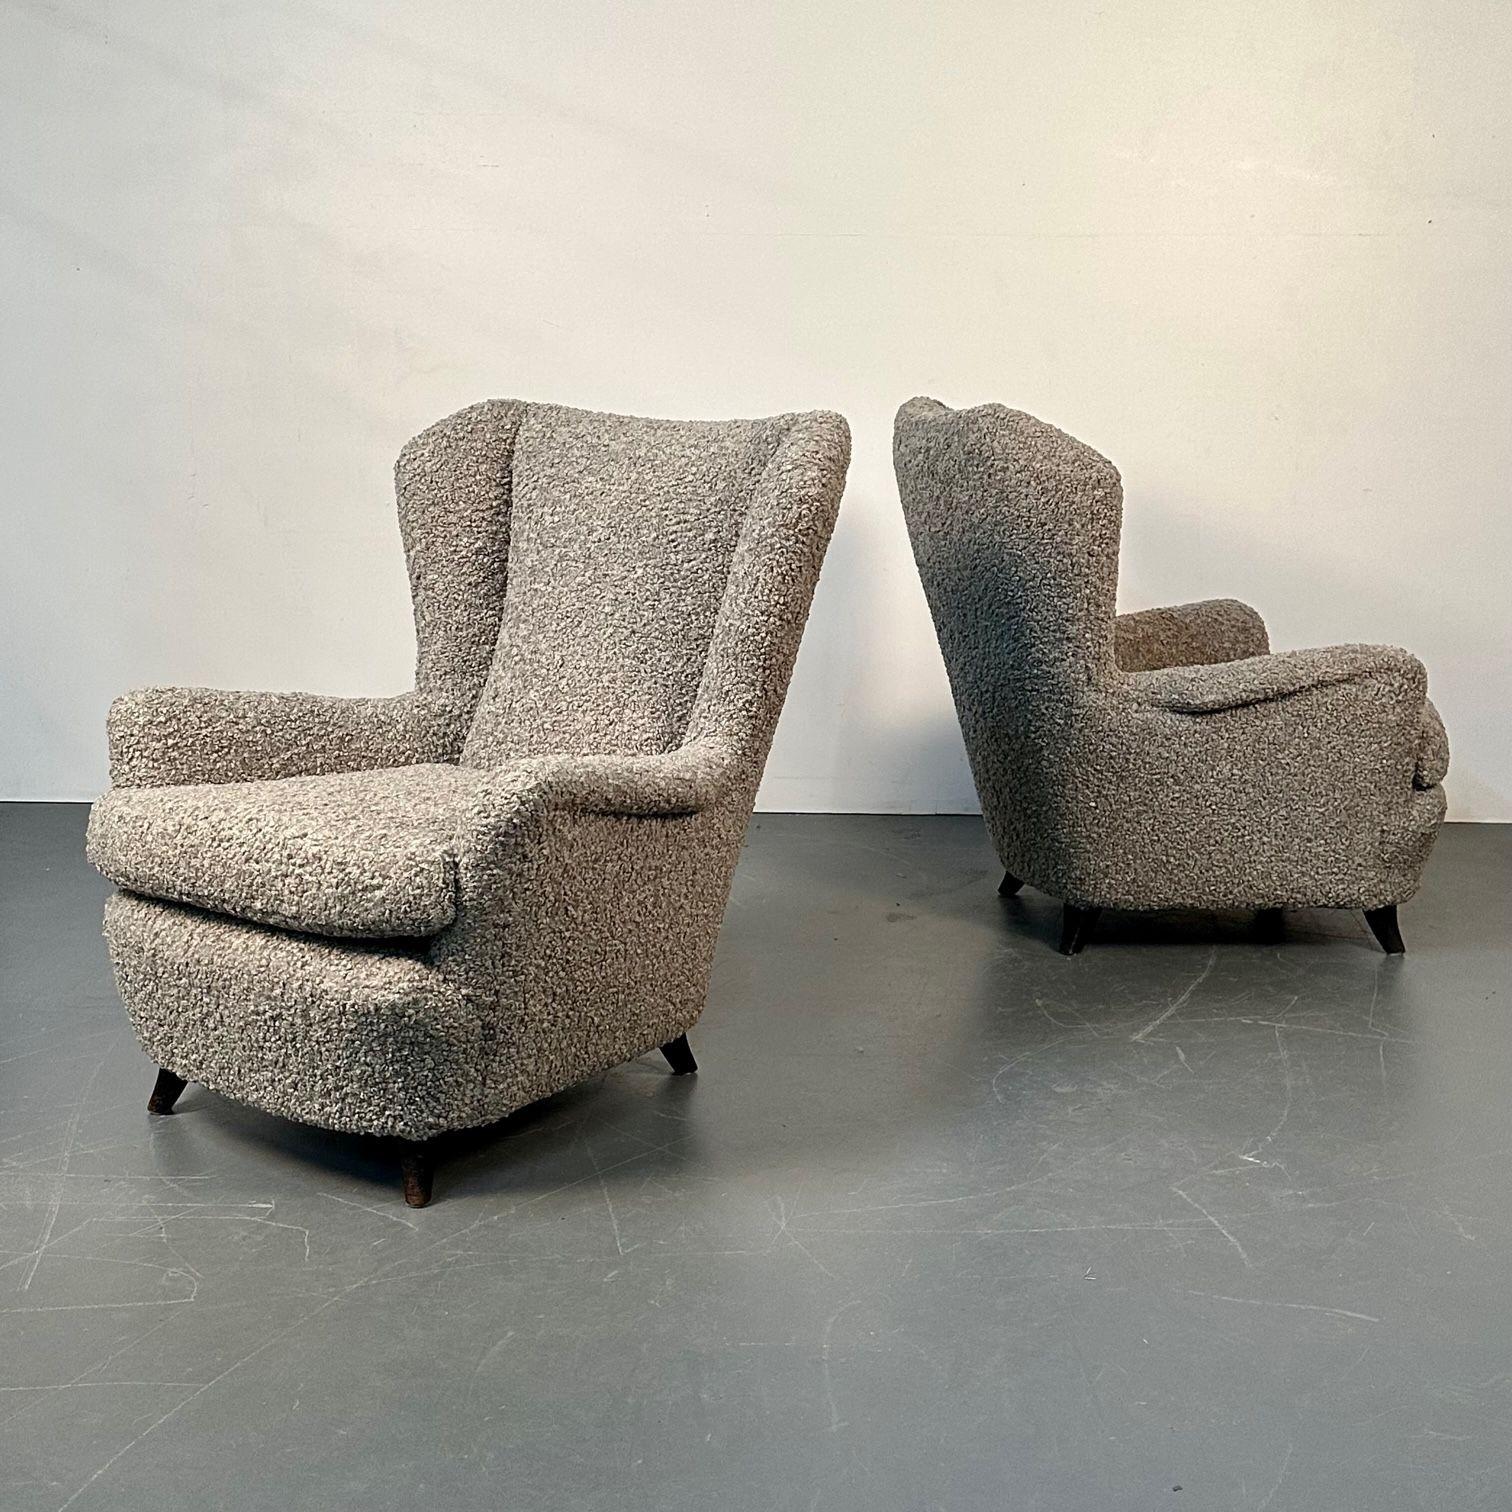 Pair Italian Mid-Century Modern wingback lounge chairs, Zanuso style grey bouclé

Similar in style to Guglielmo Ulrich and Marco Zanuso. Organic form midcentury wingback lounge chairs designed and produced in Italy circa 1950s. Newly upholstered